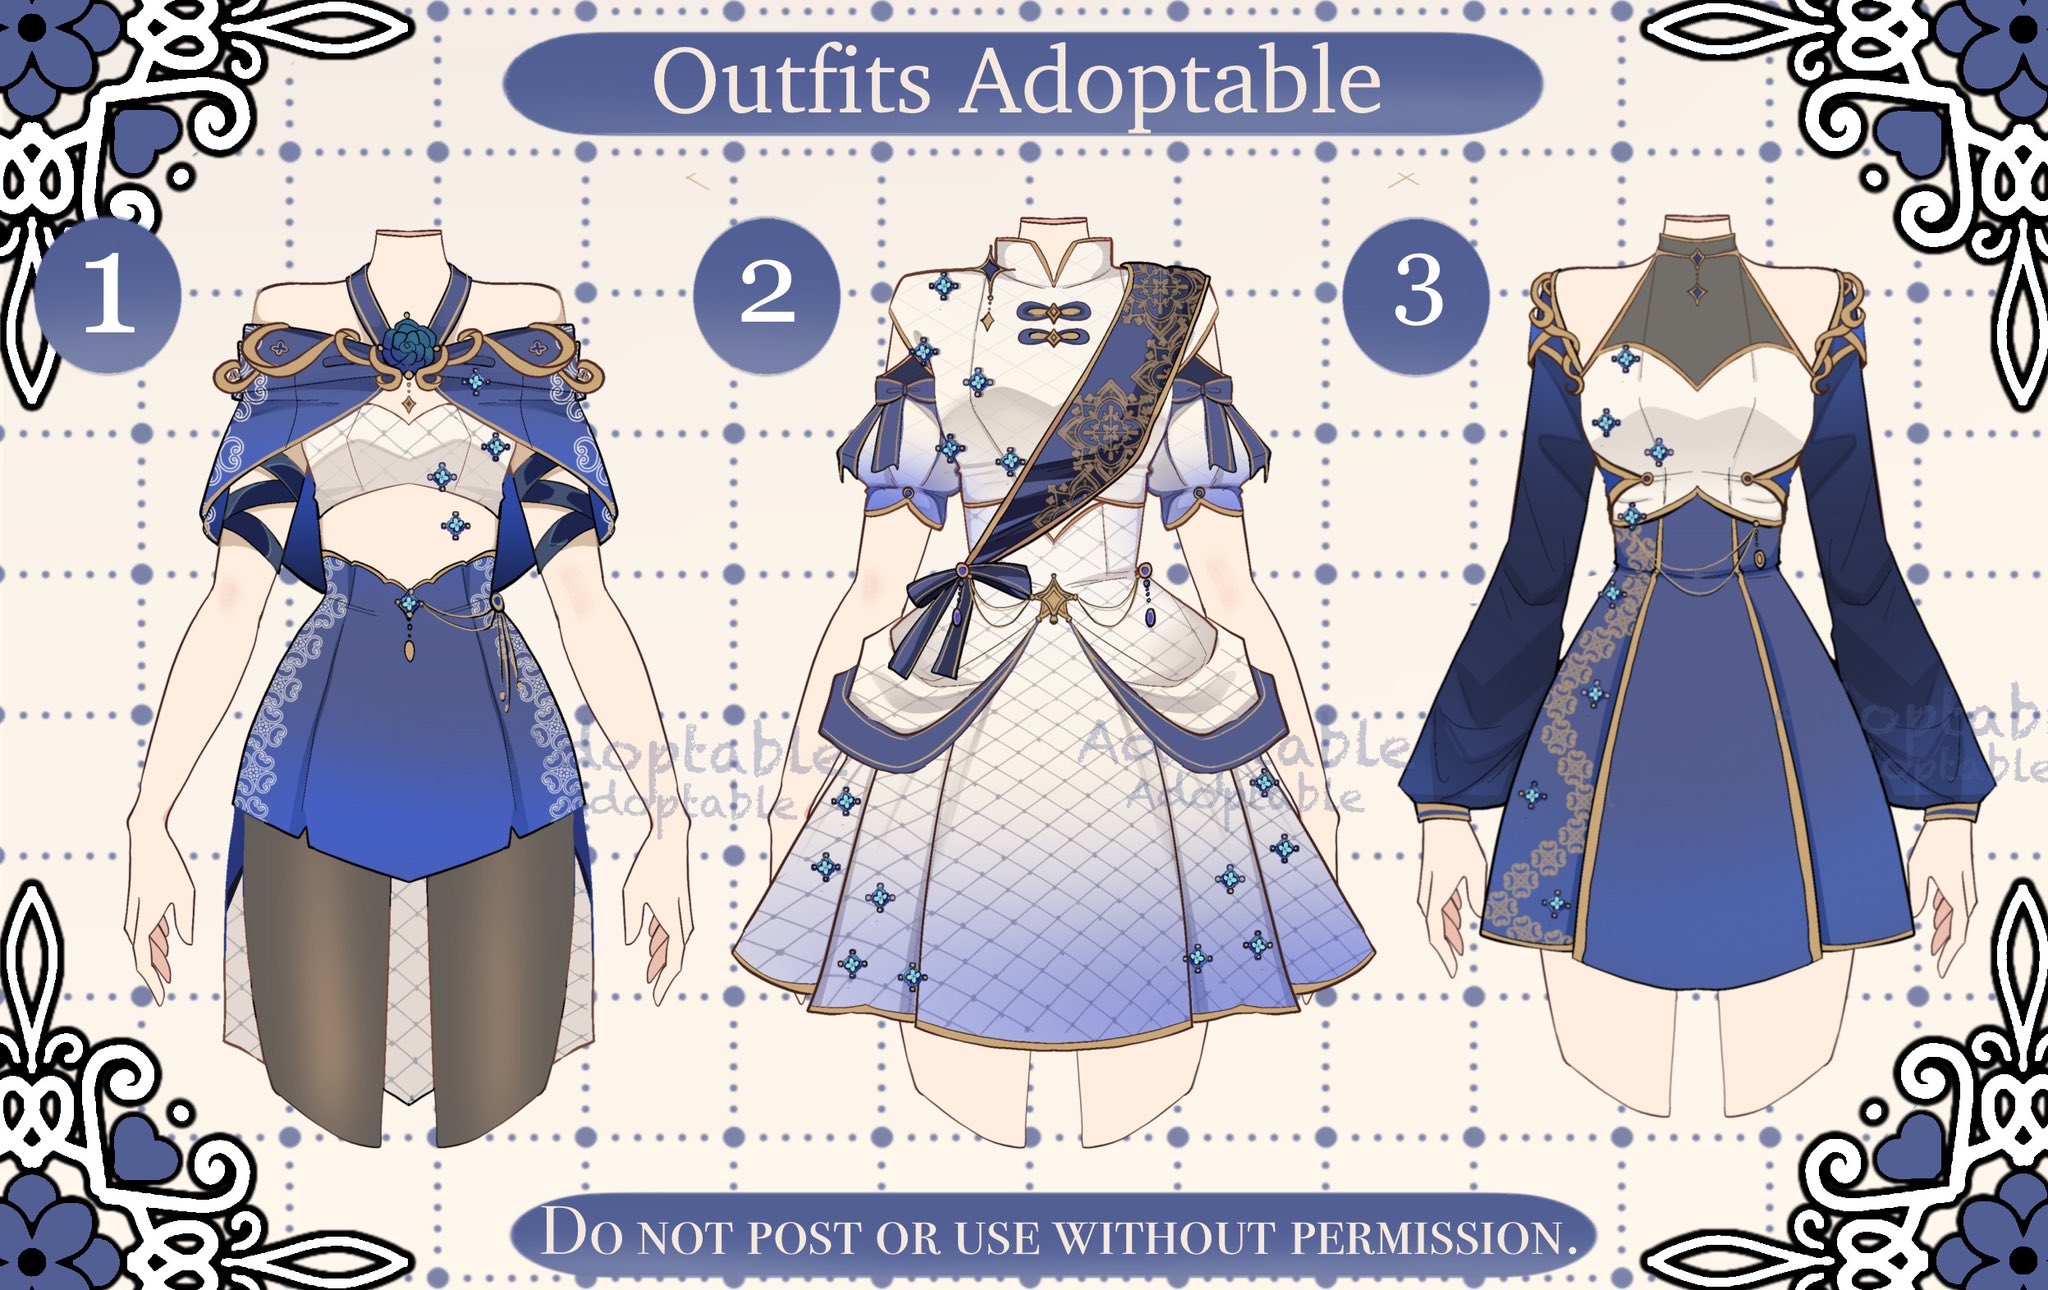 Pin by เนโร่ อัสต้า on เสื้อผ้าชาย | Wonderland clothes, Anime inspired  outfits, Clothing design sketches